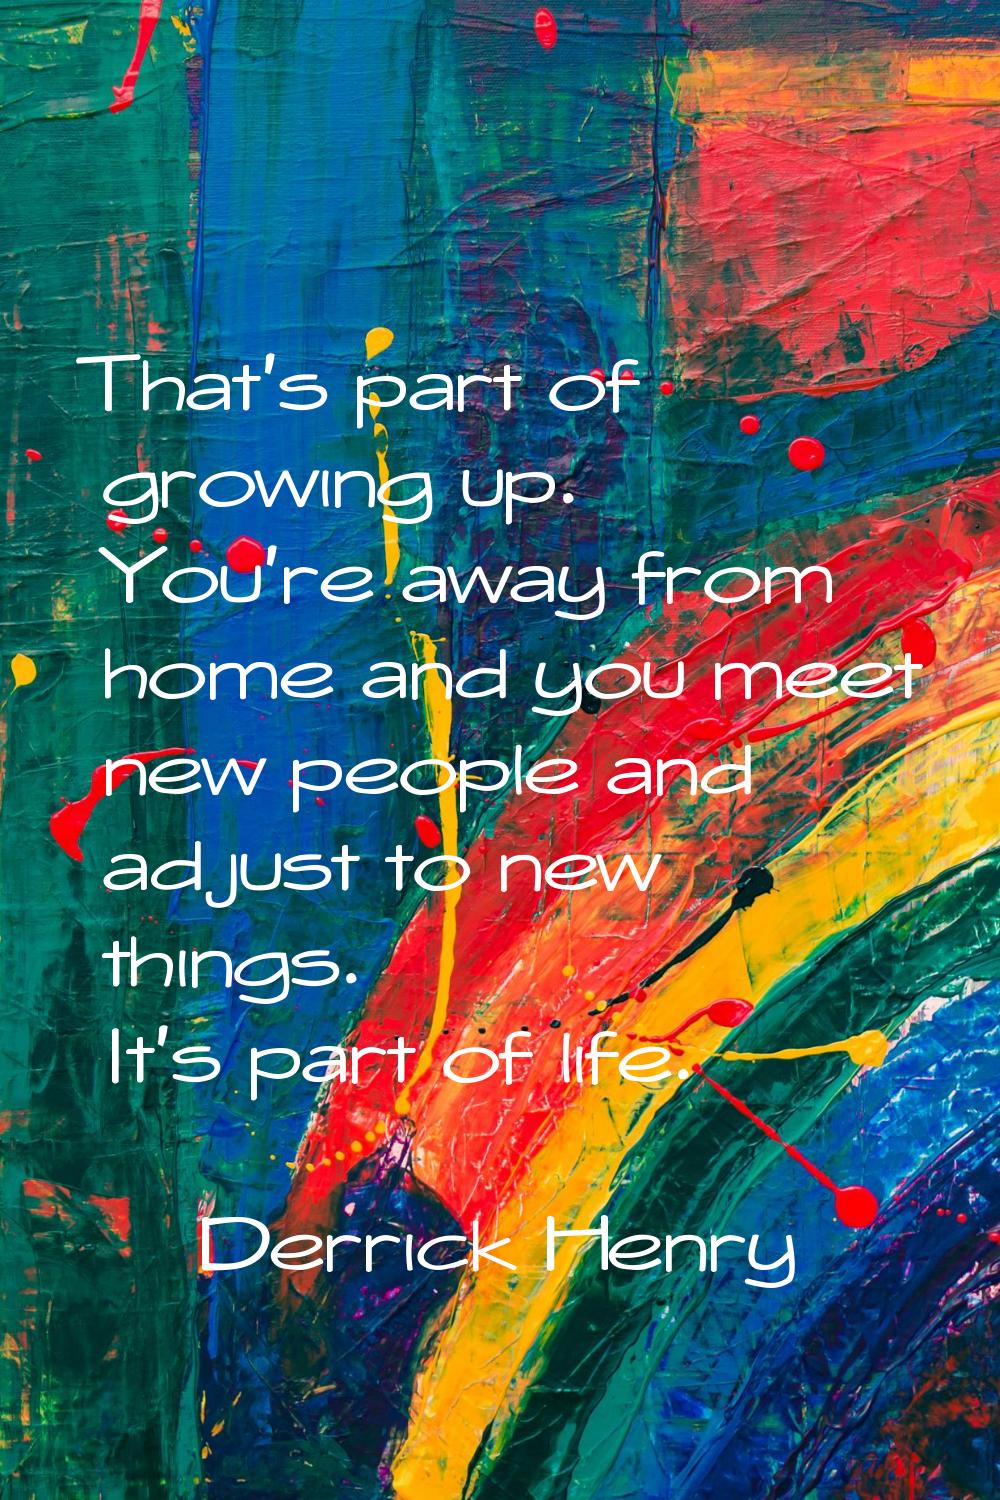 That's part of growing up. You're away from home and you meet new people and adjust to new things. 